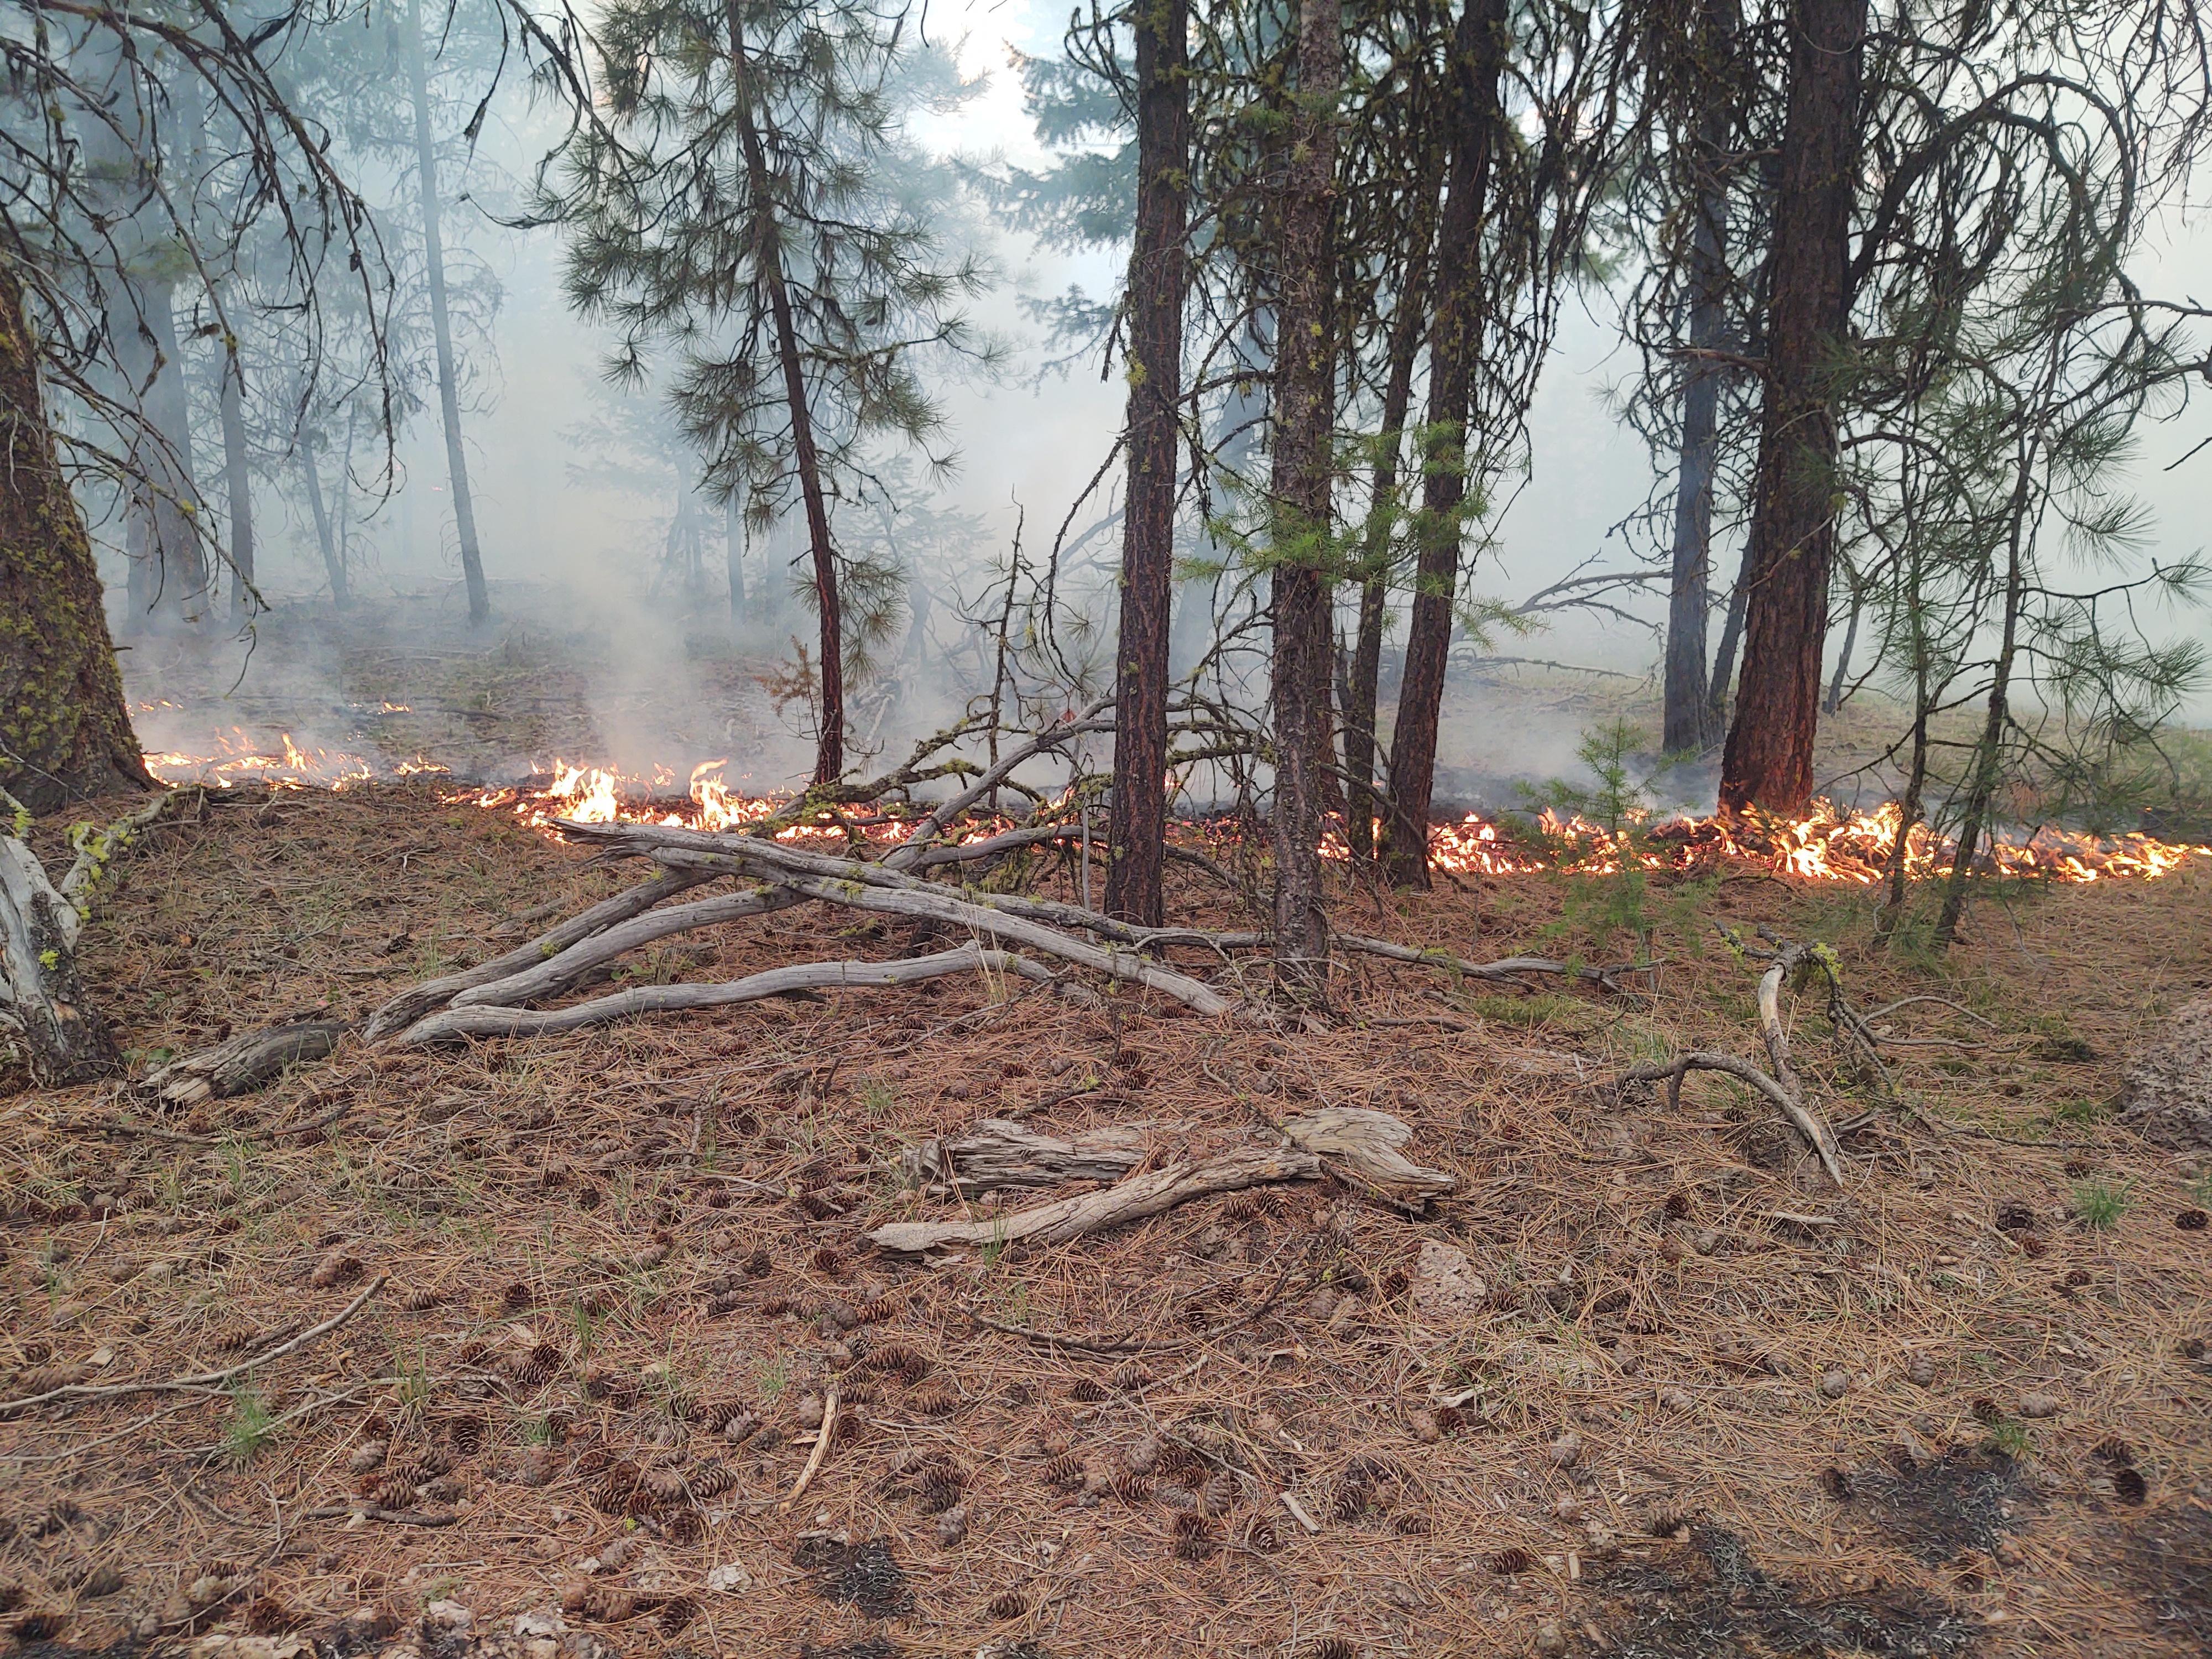 Low burning flames, slowly moving across the ground in a forested area. 